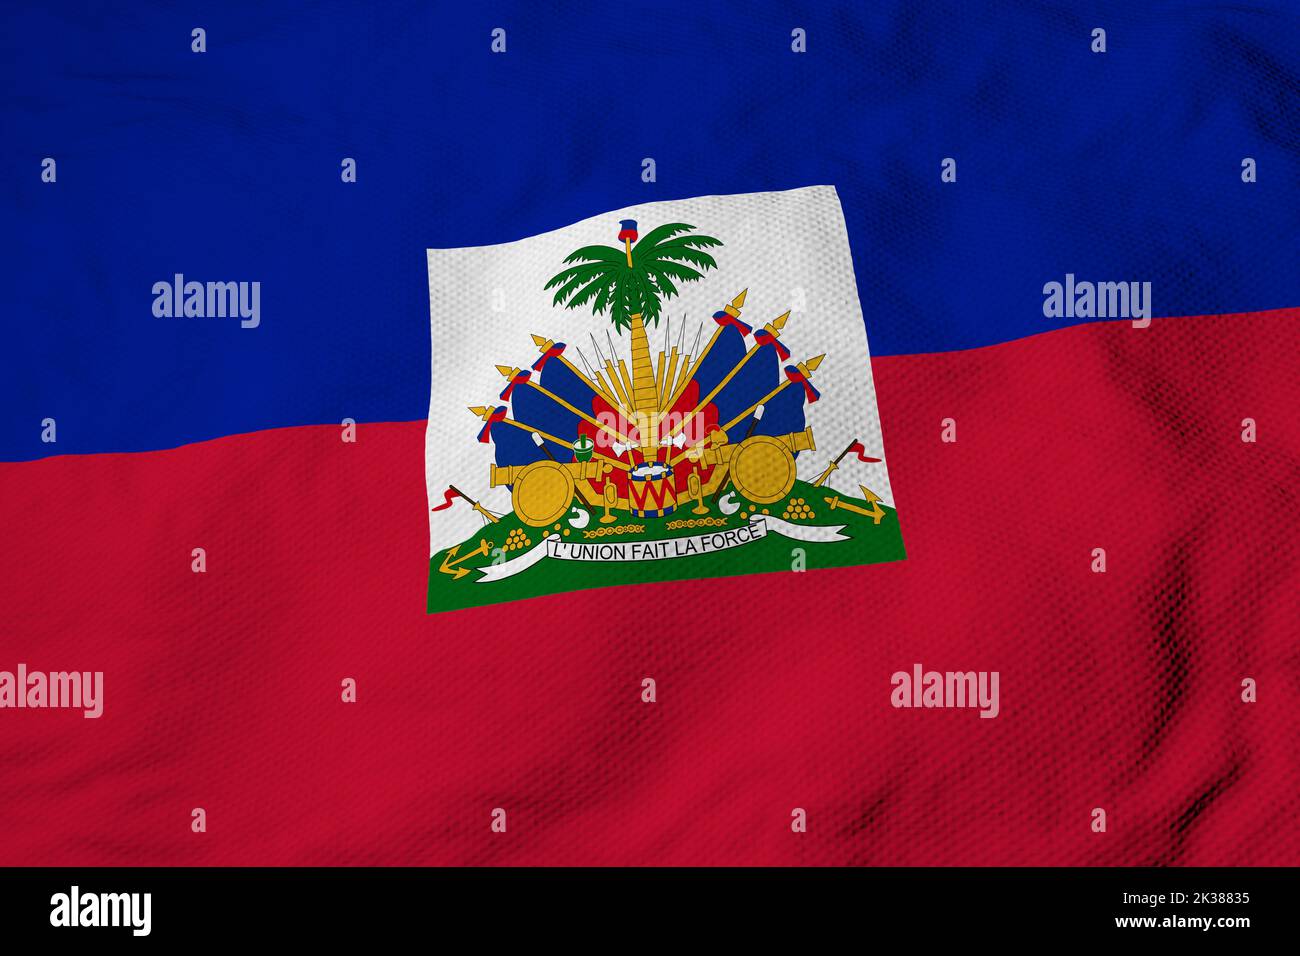 Full frame close-up on a waving Flag of Haiti in 3D rendering. Stock Photo